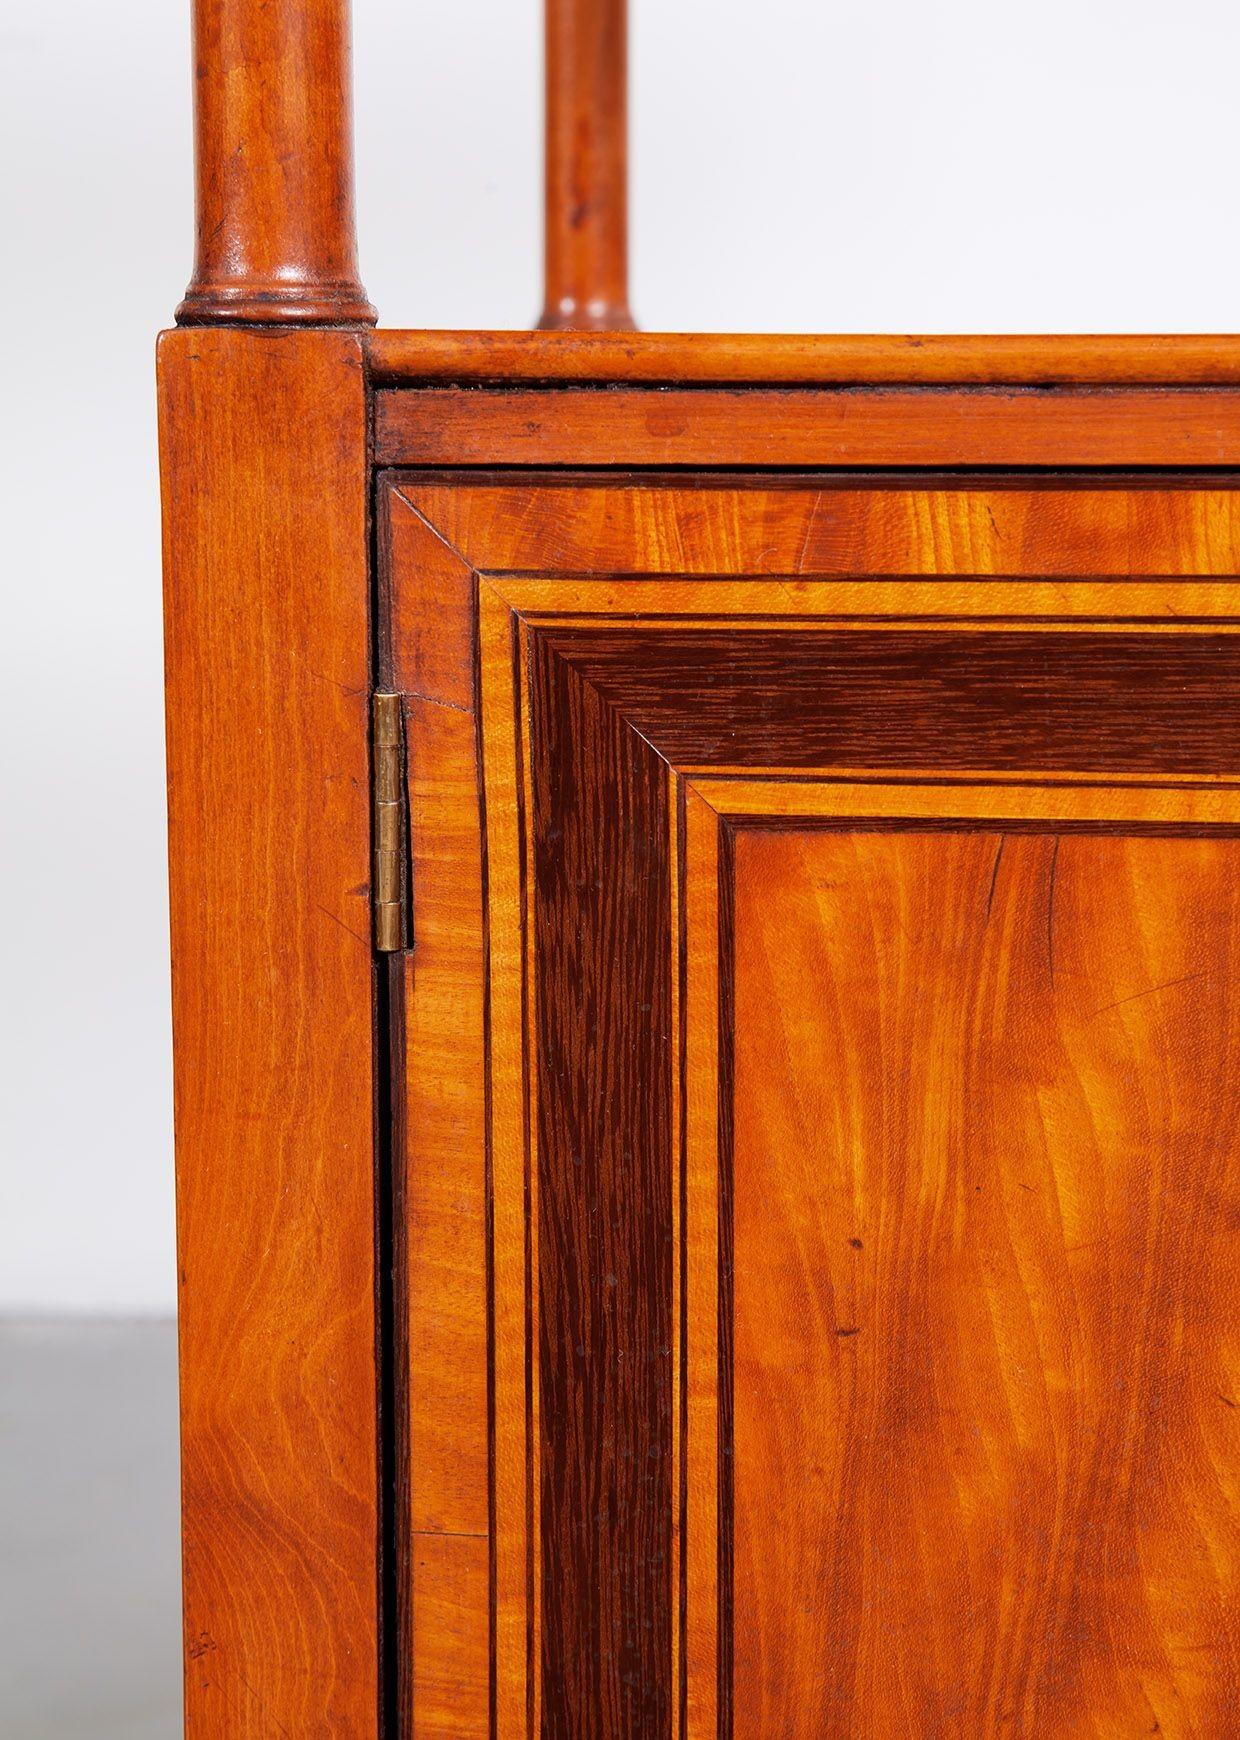 A Rare Pair of 18th c. English Satinwood Etageres For Sale 9